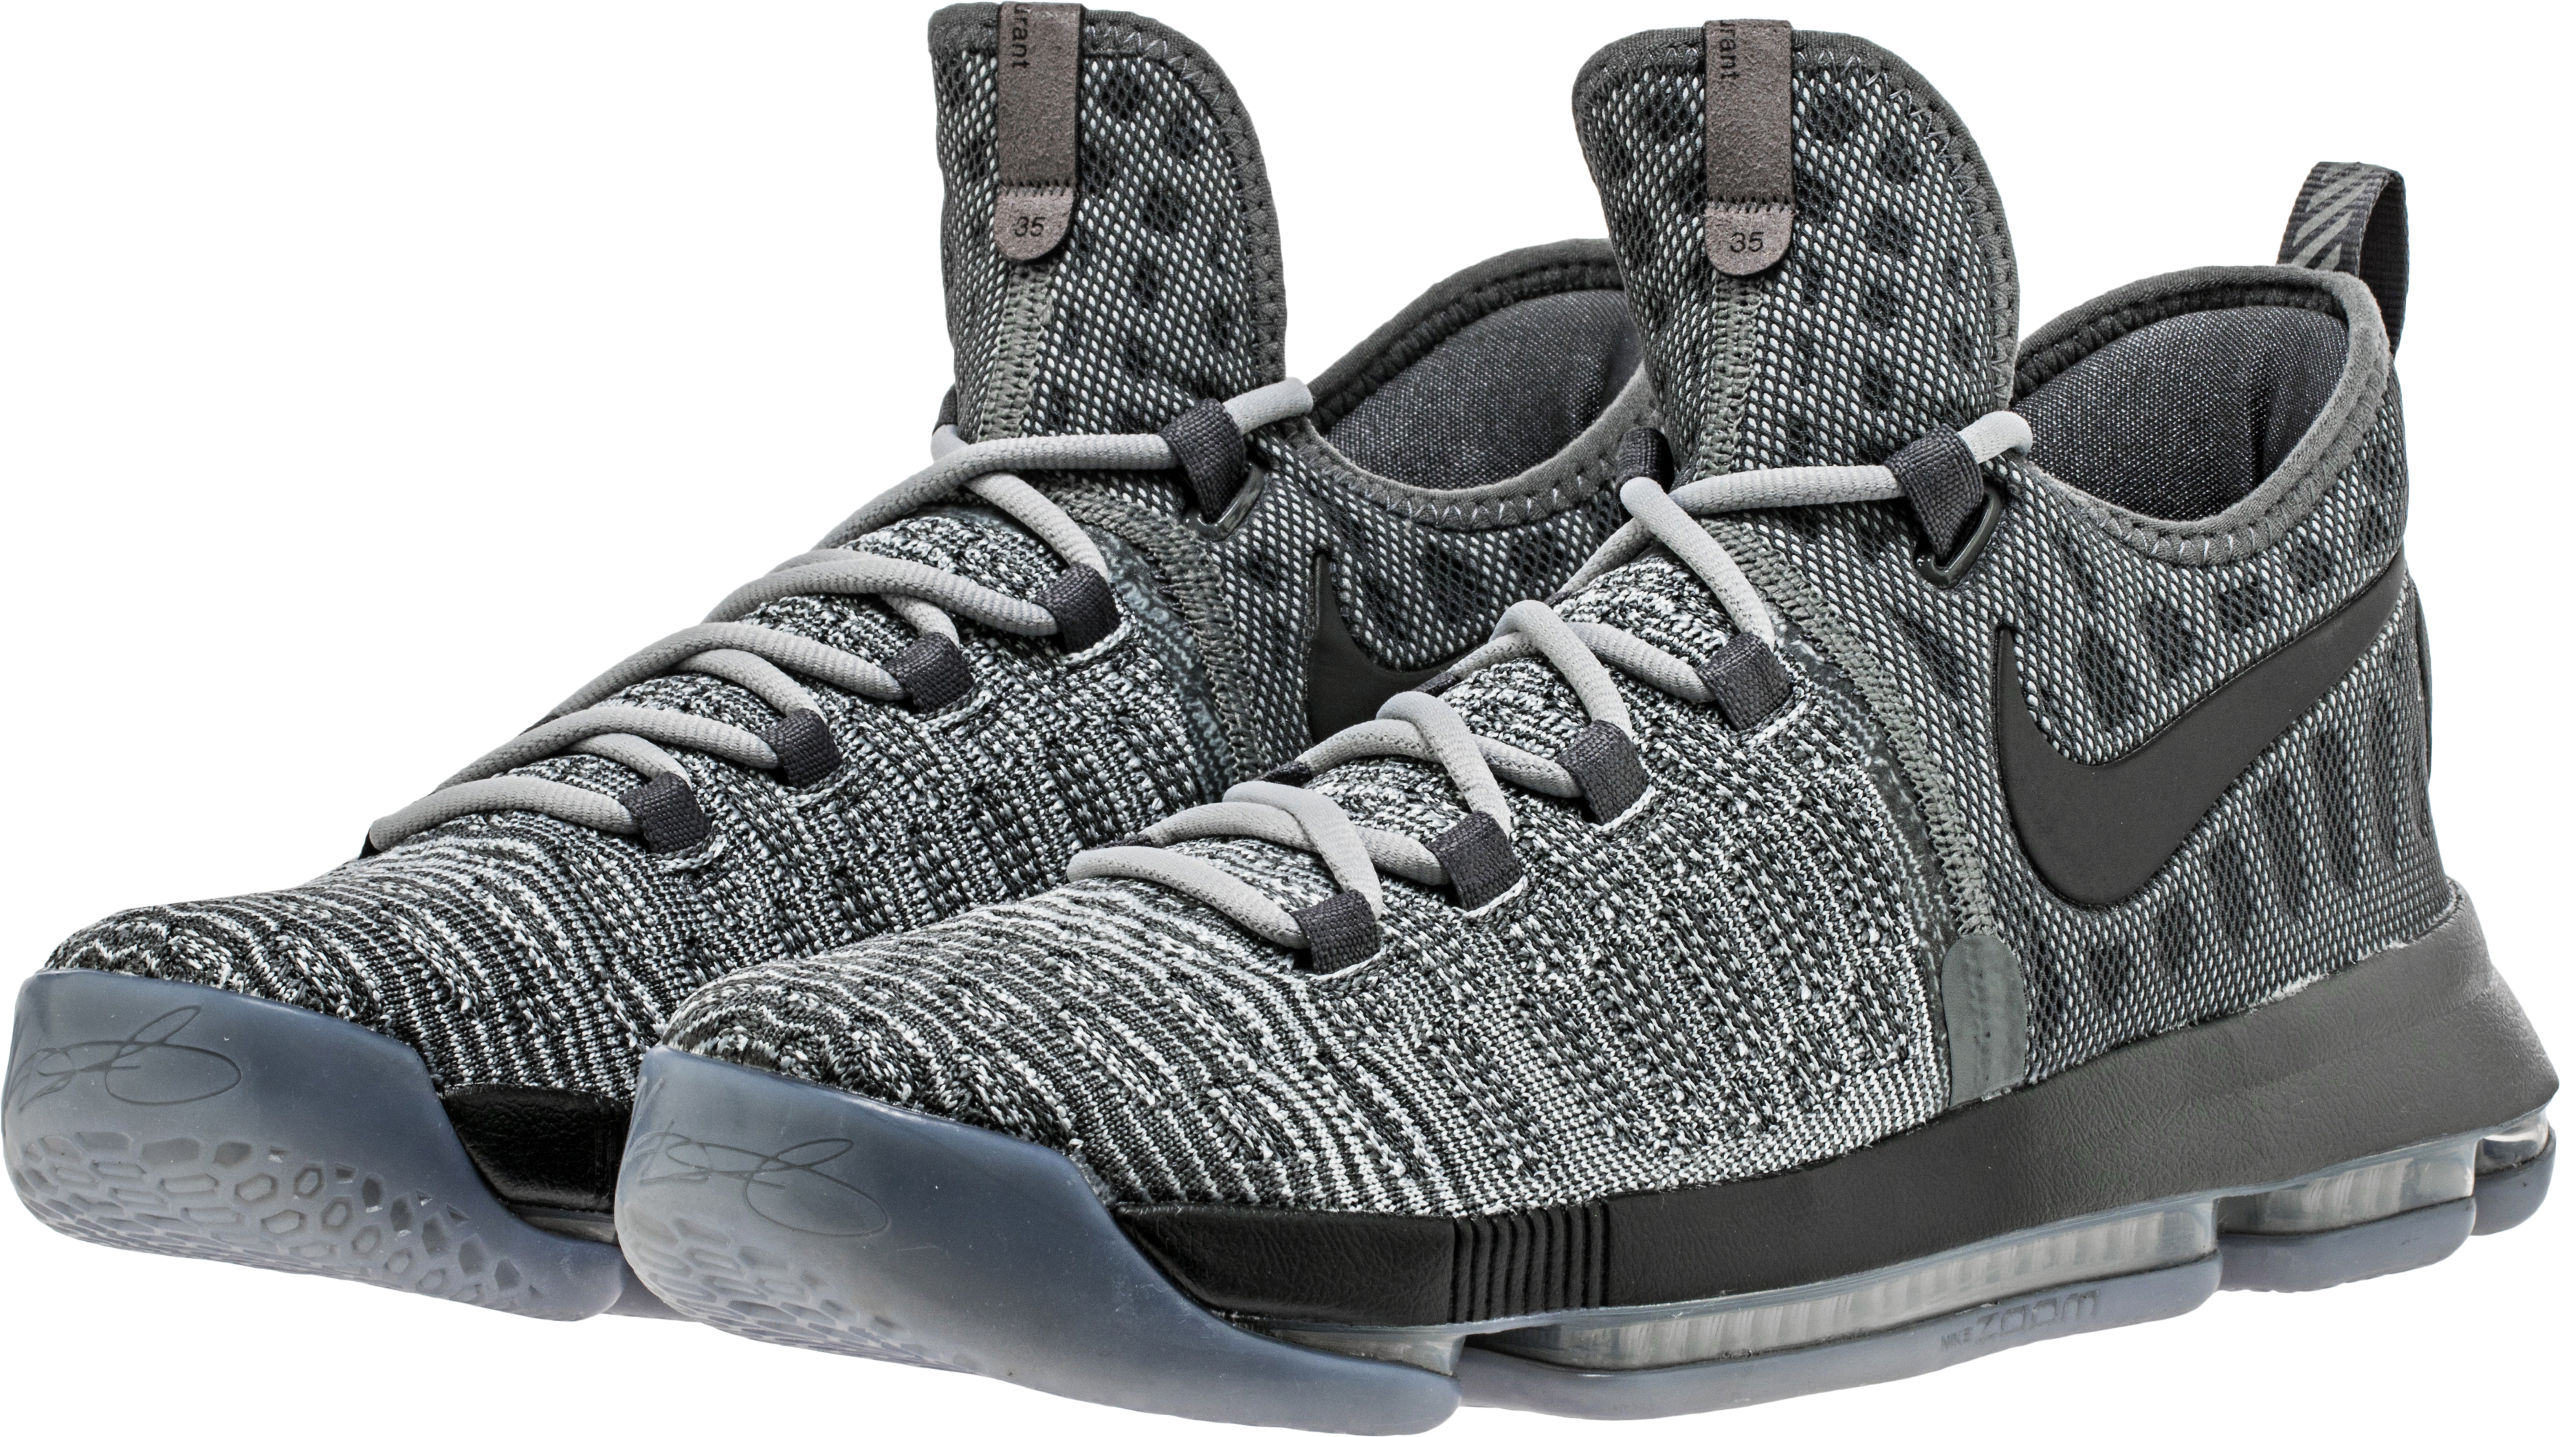 The Nike KD 9 is Now Available in 'Wolf 